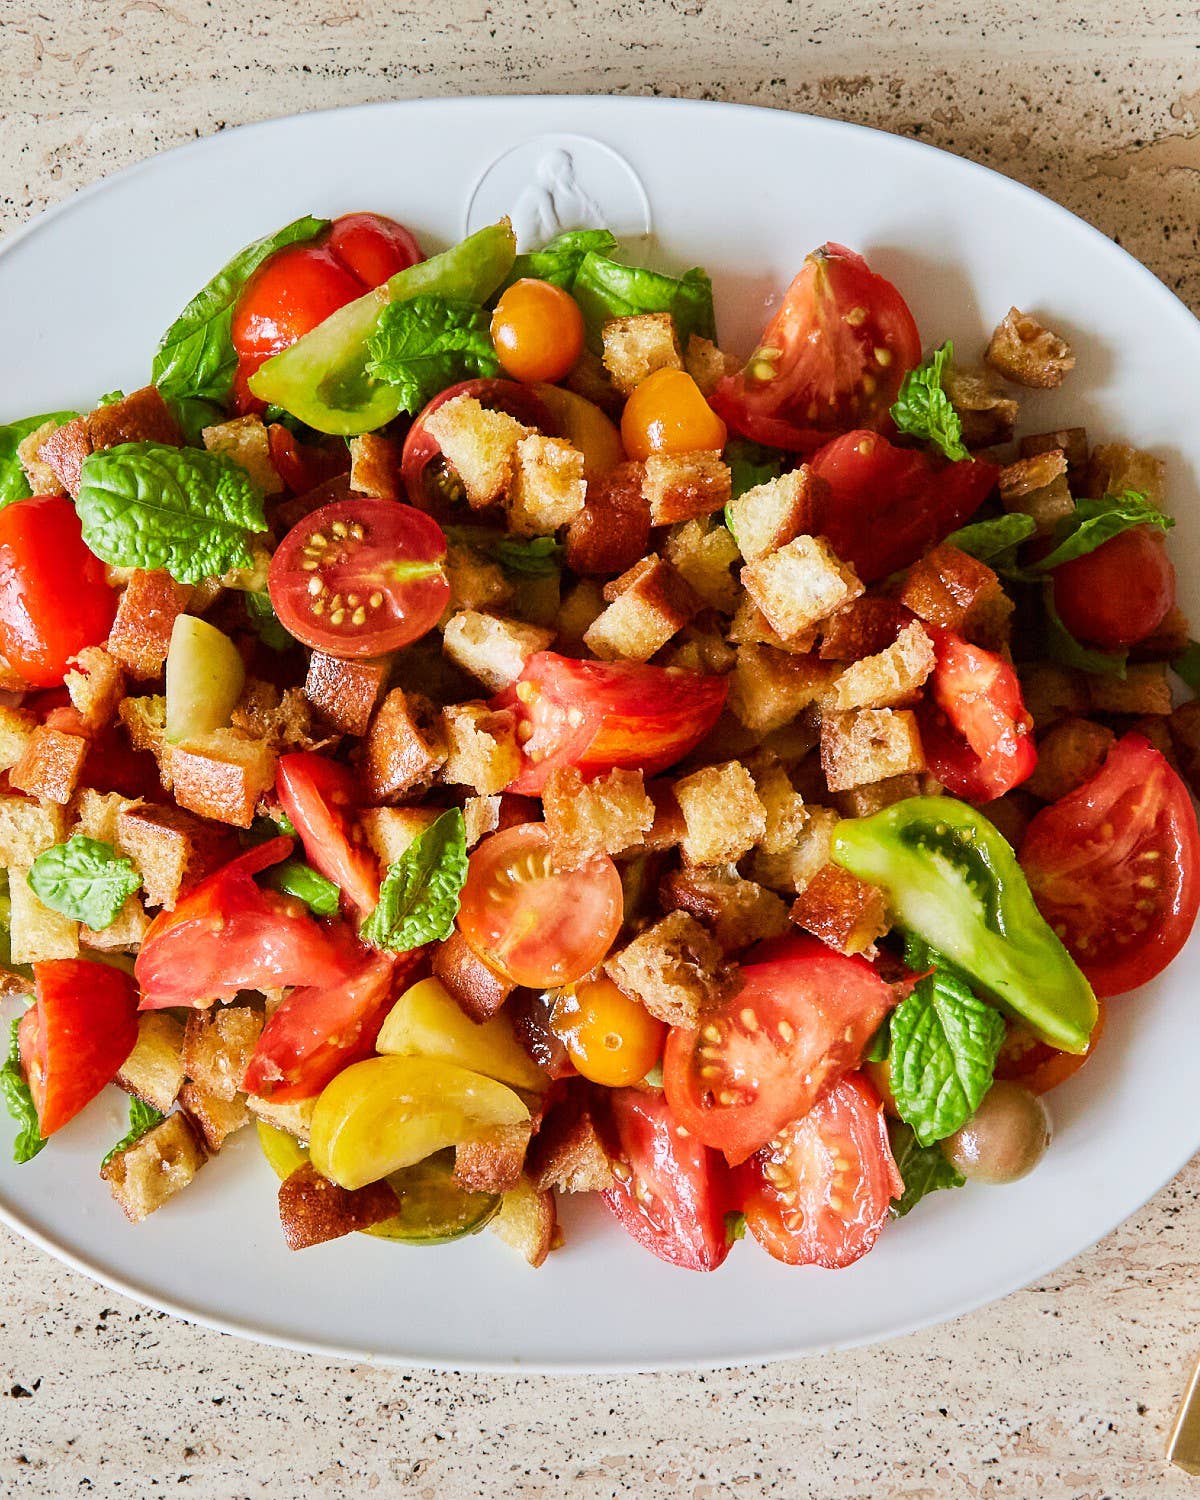 Seize the Summer with Our Top 12 Tomato Recipes